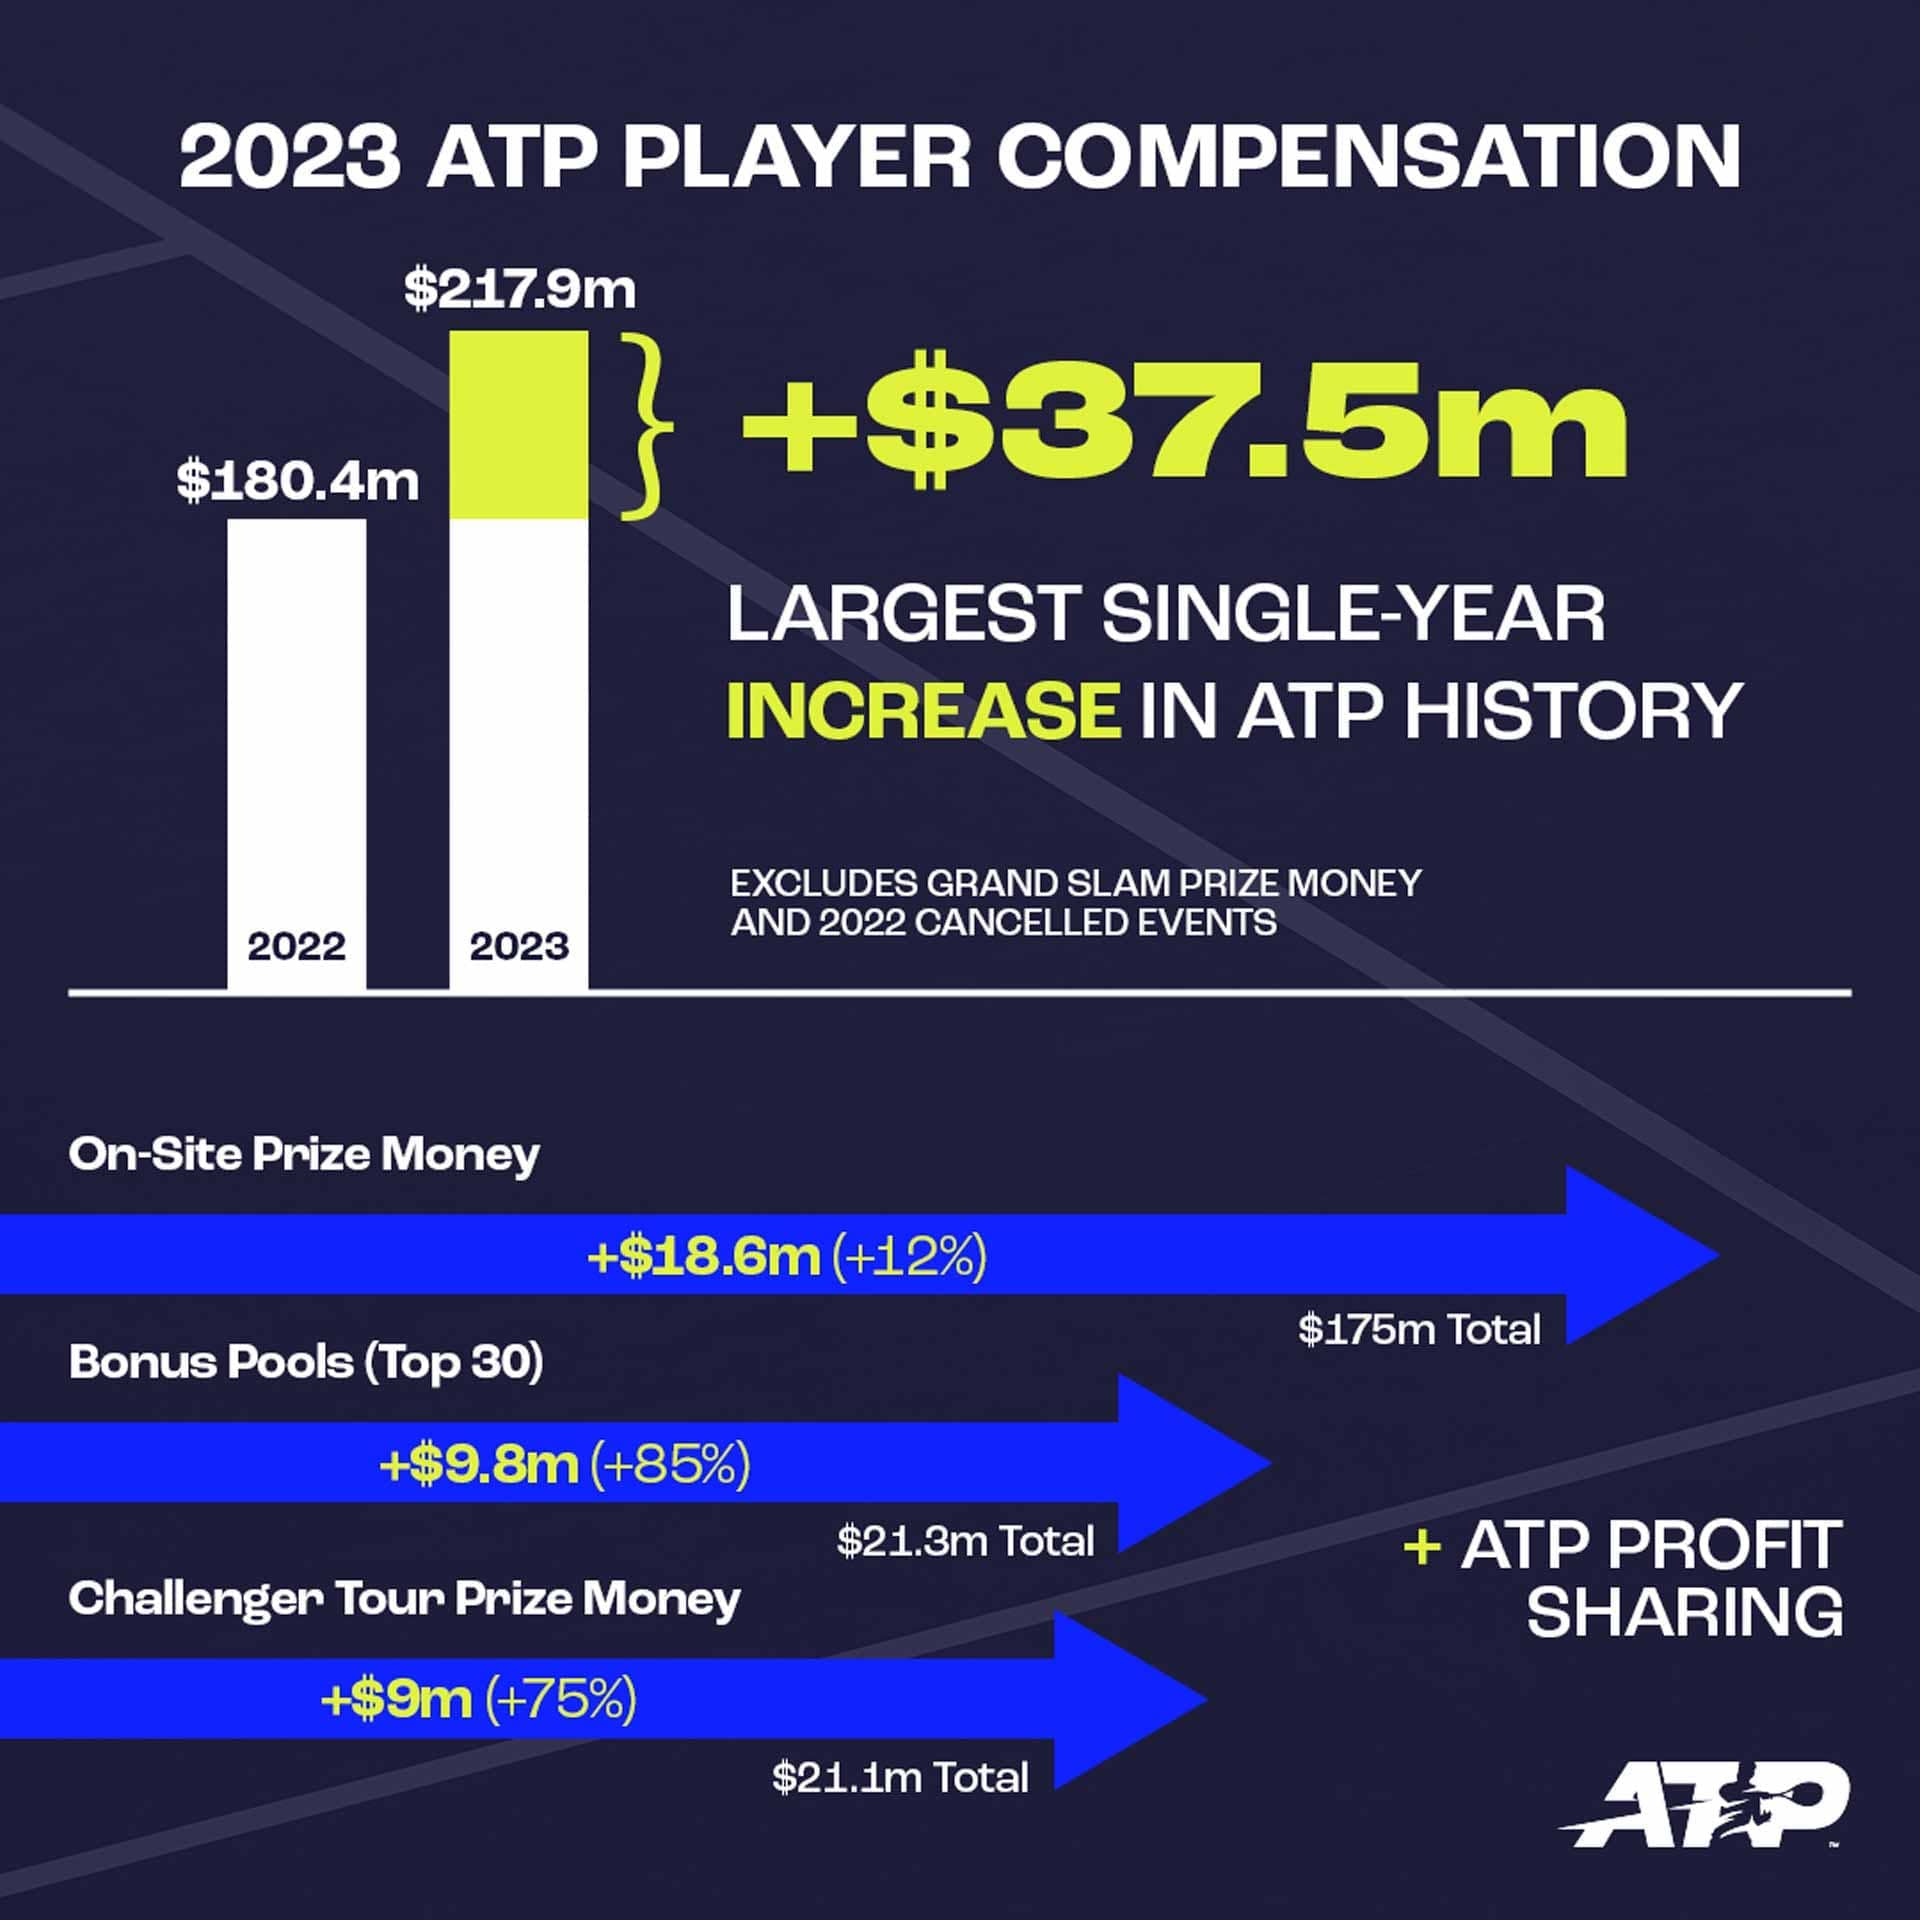 Top 10 Records Pepperstone ATP Rankings 50th Anniversary, ATP Tour